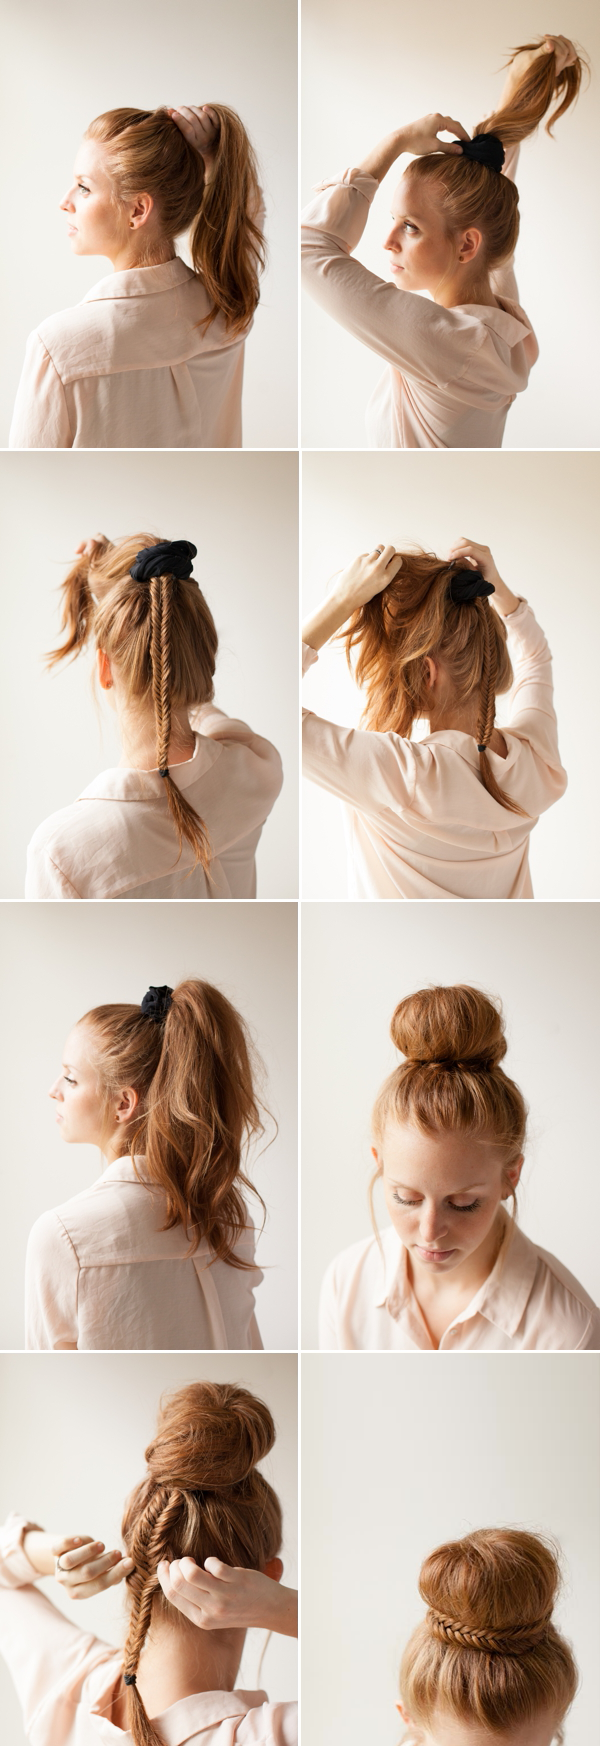 18 Amazing Ideas and Tutorials for Elegant Hairstyle (1)